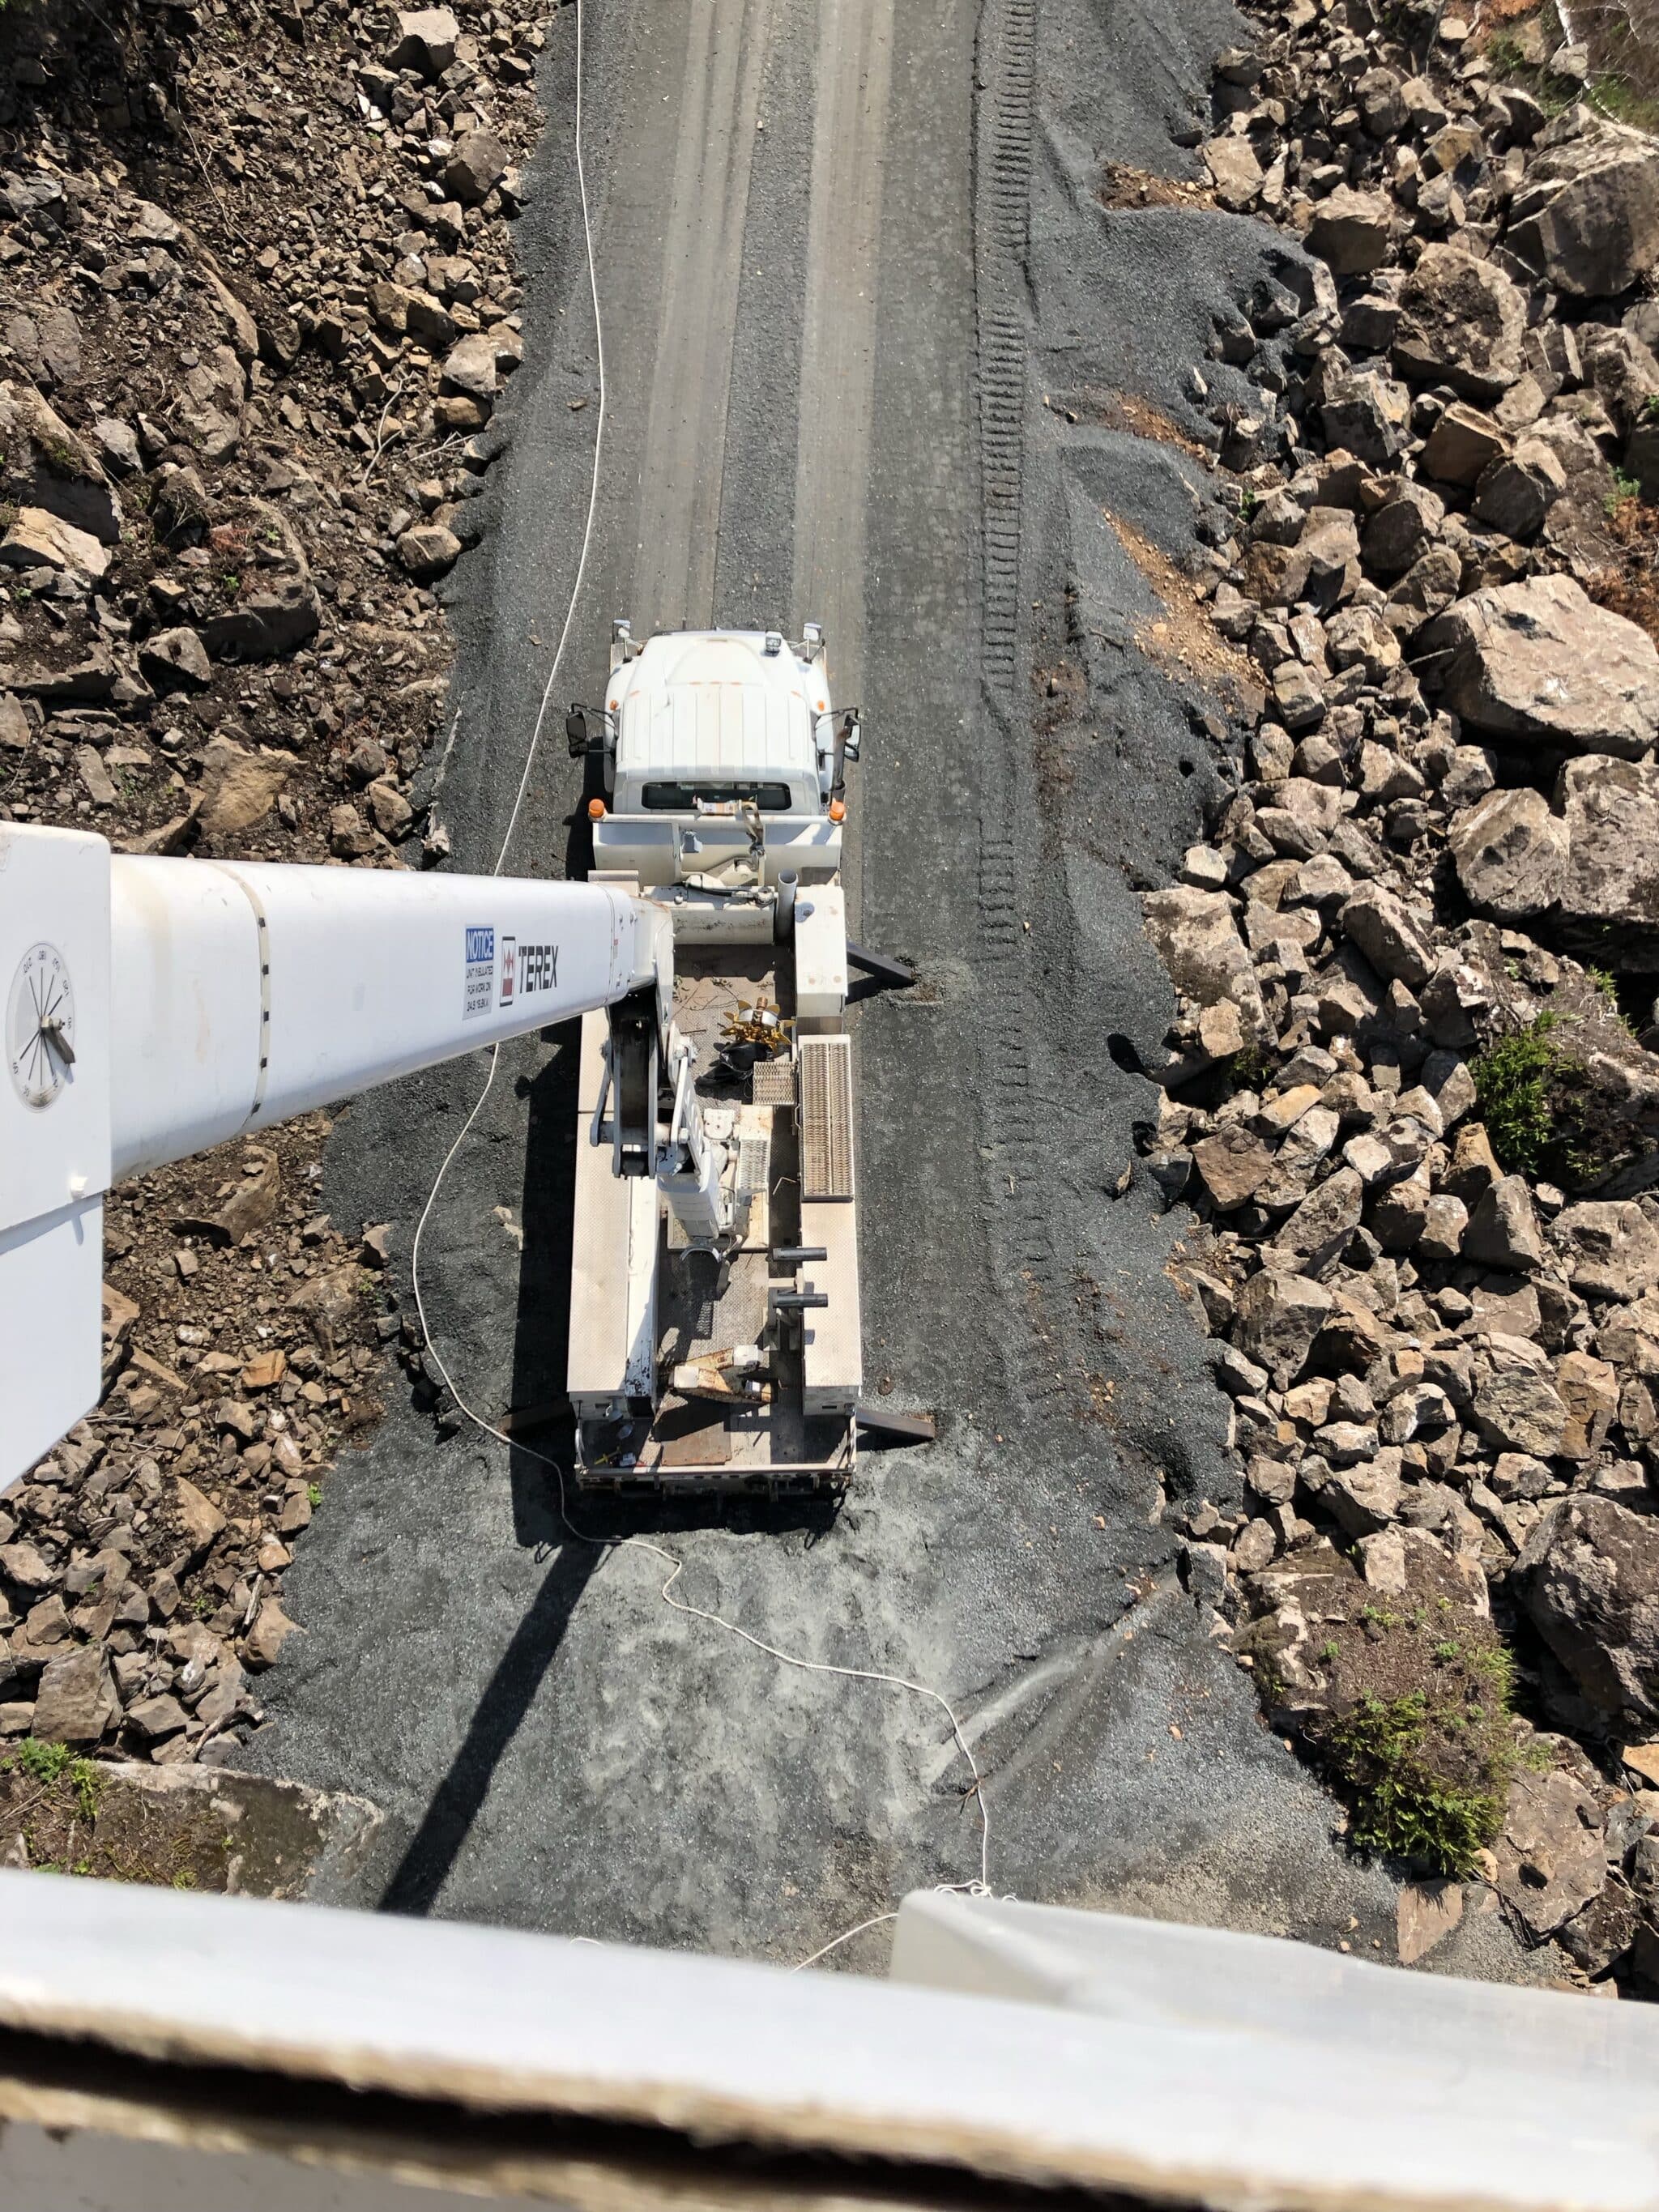 View from the top of the crane arm to the truck and ground below